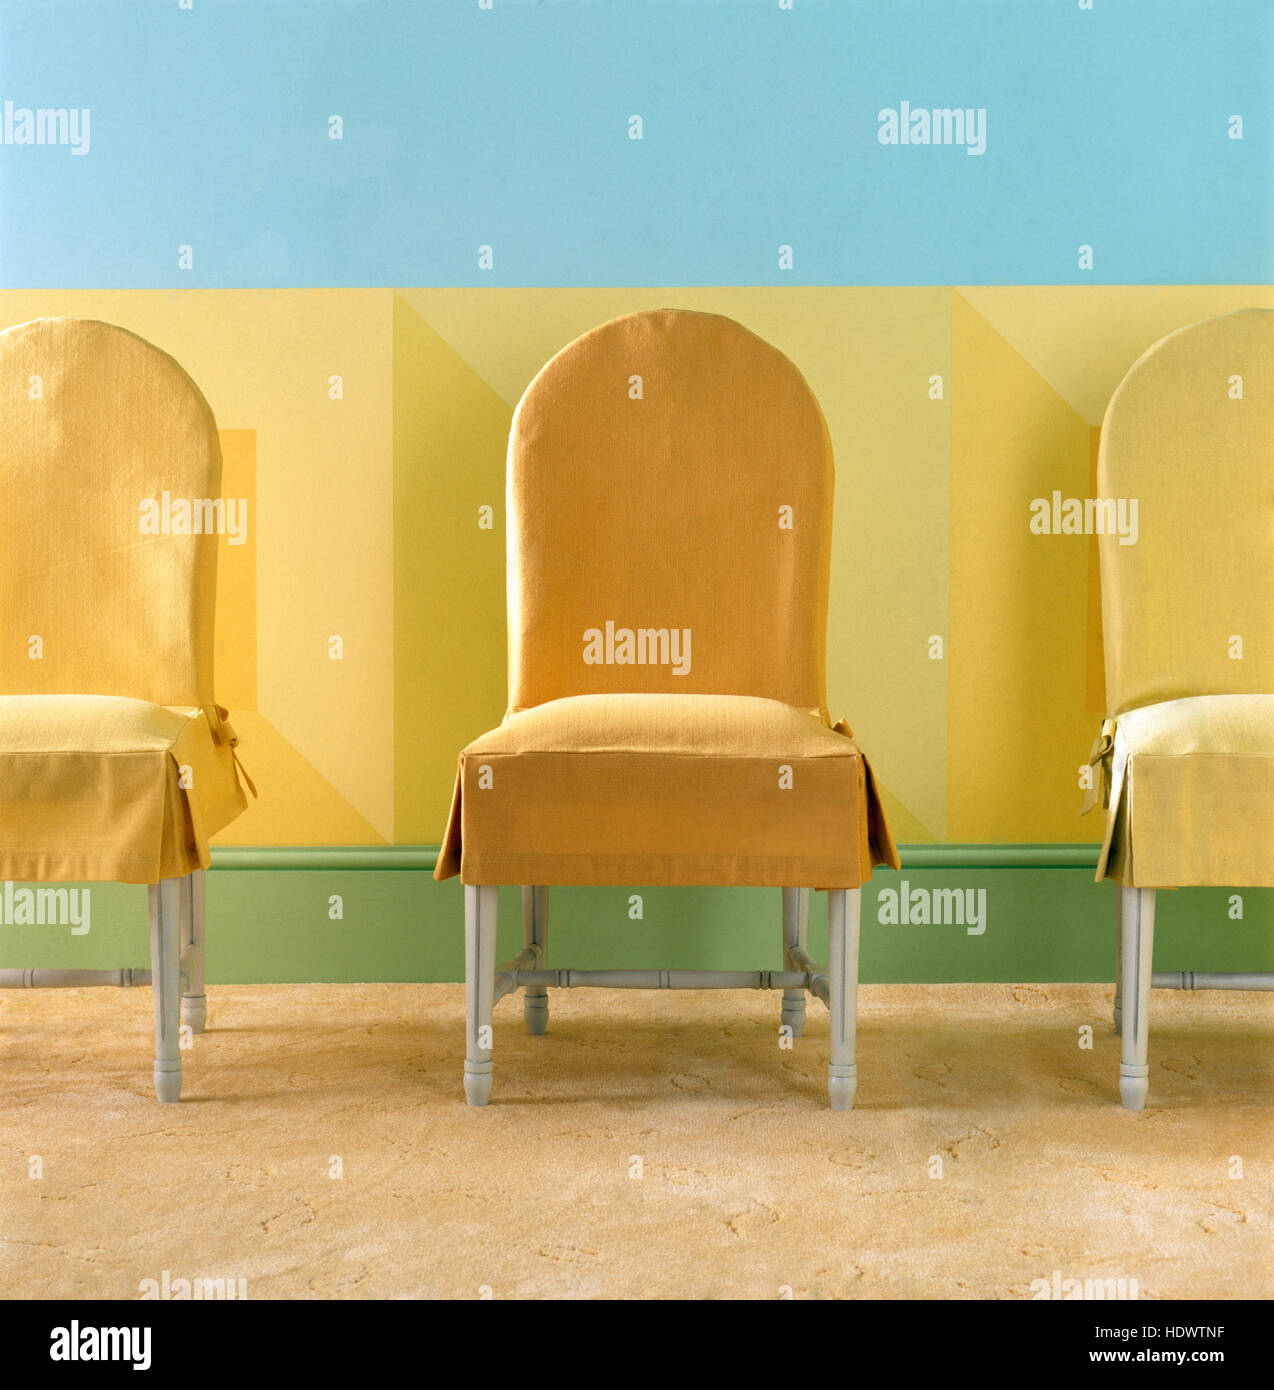 Yellow loose covers on chairs against a yellow and turquoise painted wall Stock Photo